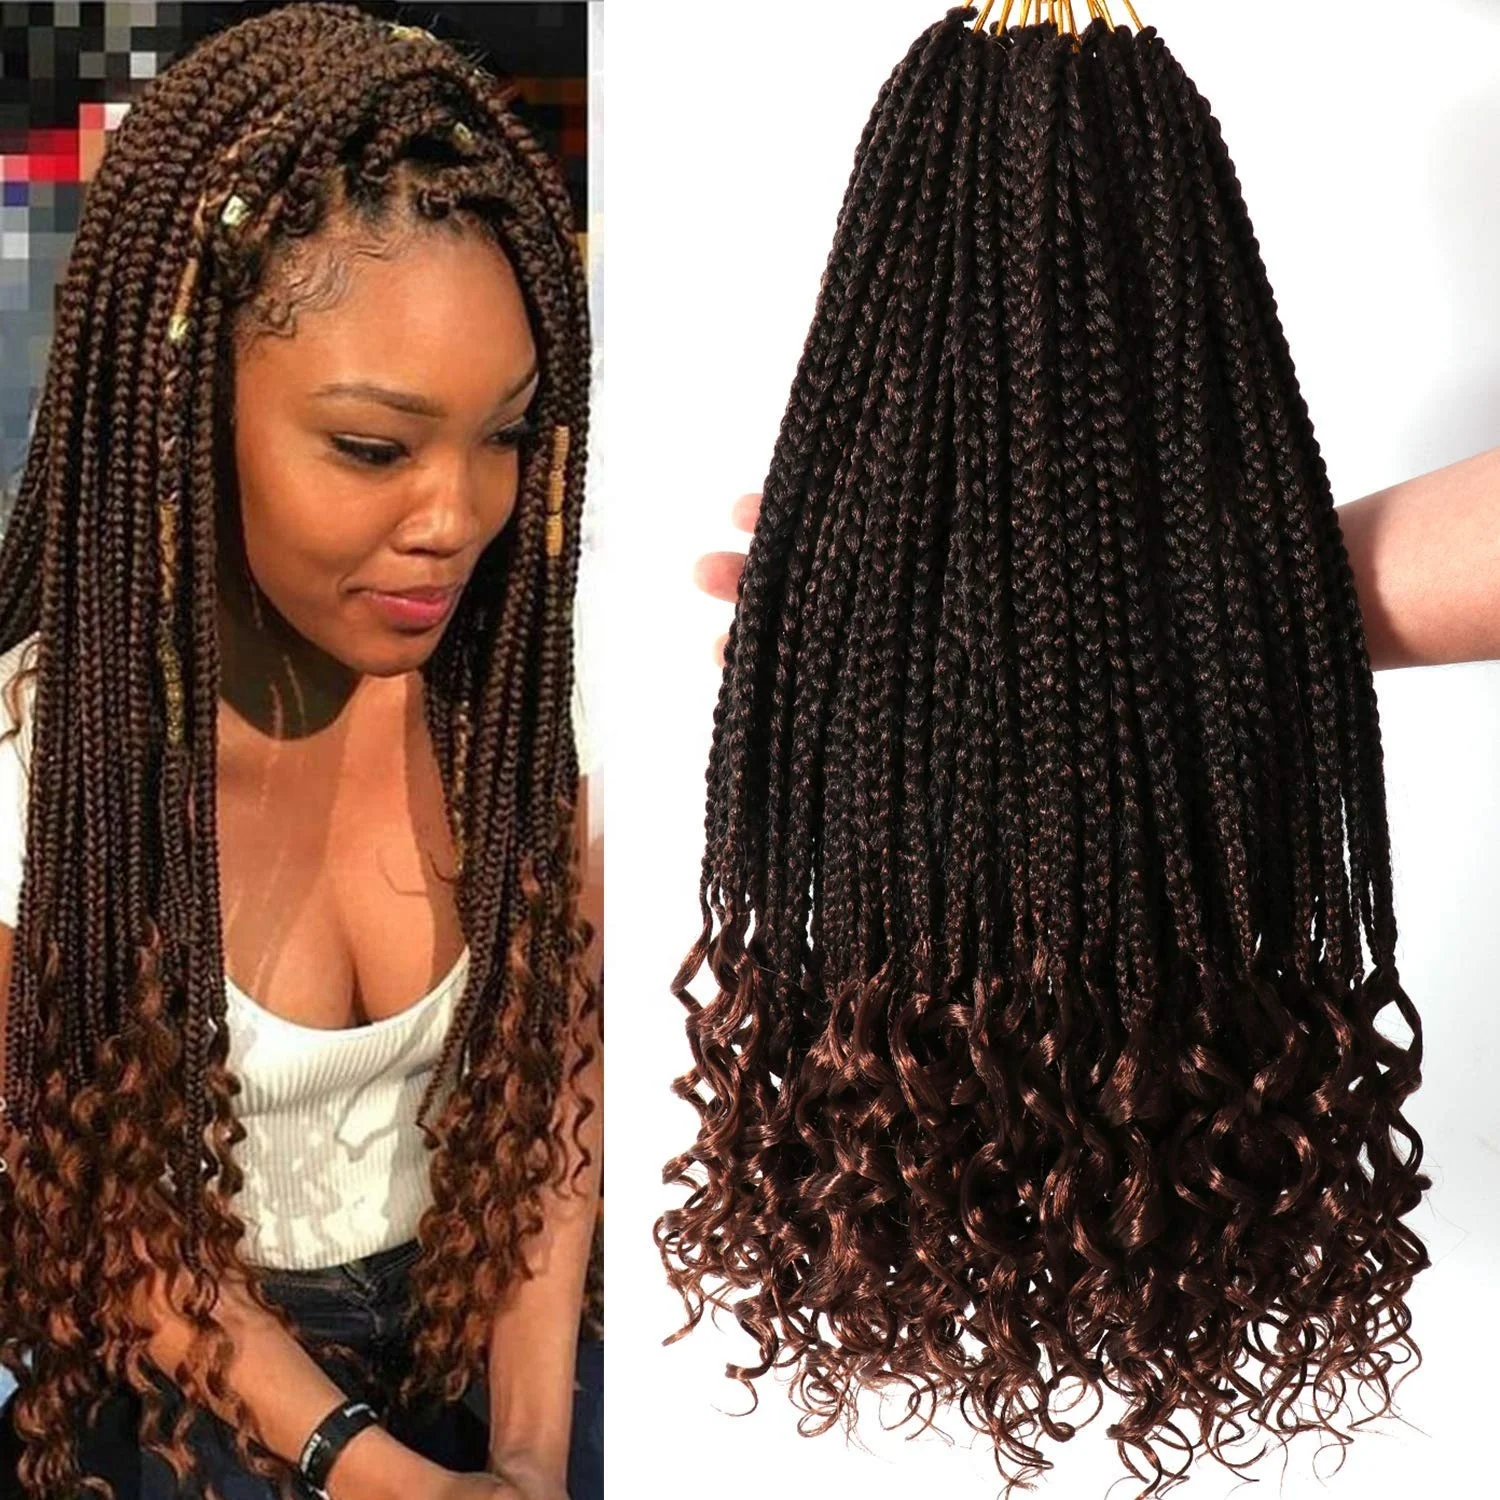 Wholesale free shipping Box Braids with Wavy Ends Light Color Synthetic Crochet Braids Box Braid Crochet Hair Extension 30inch From m.alibaba.com